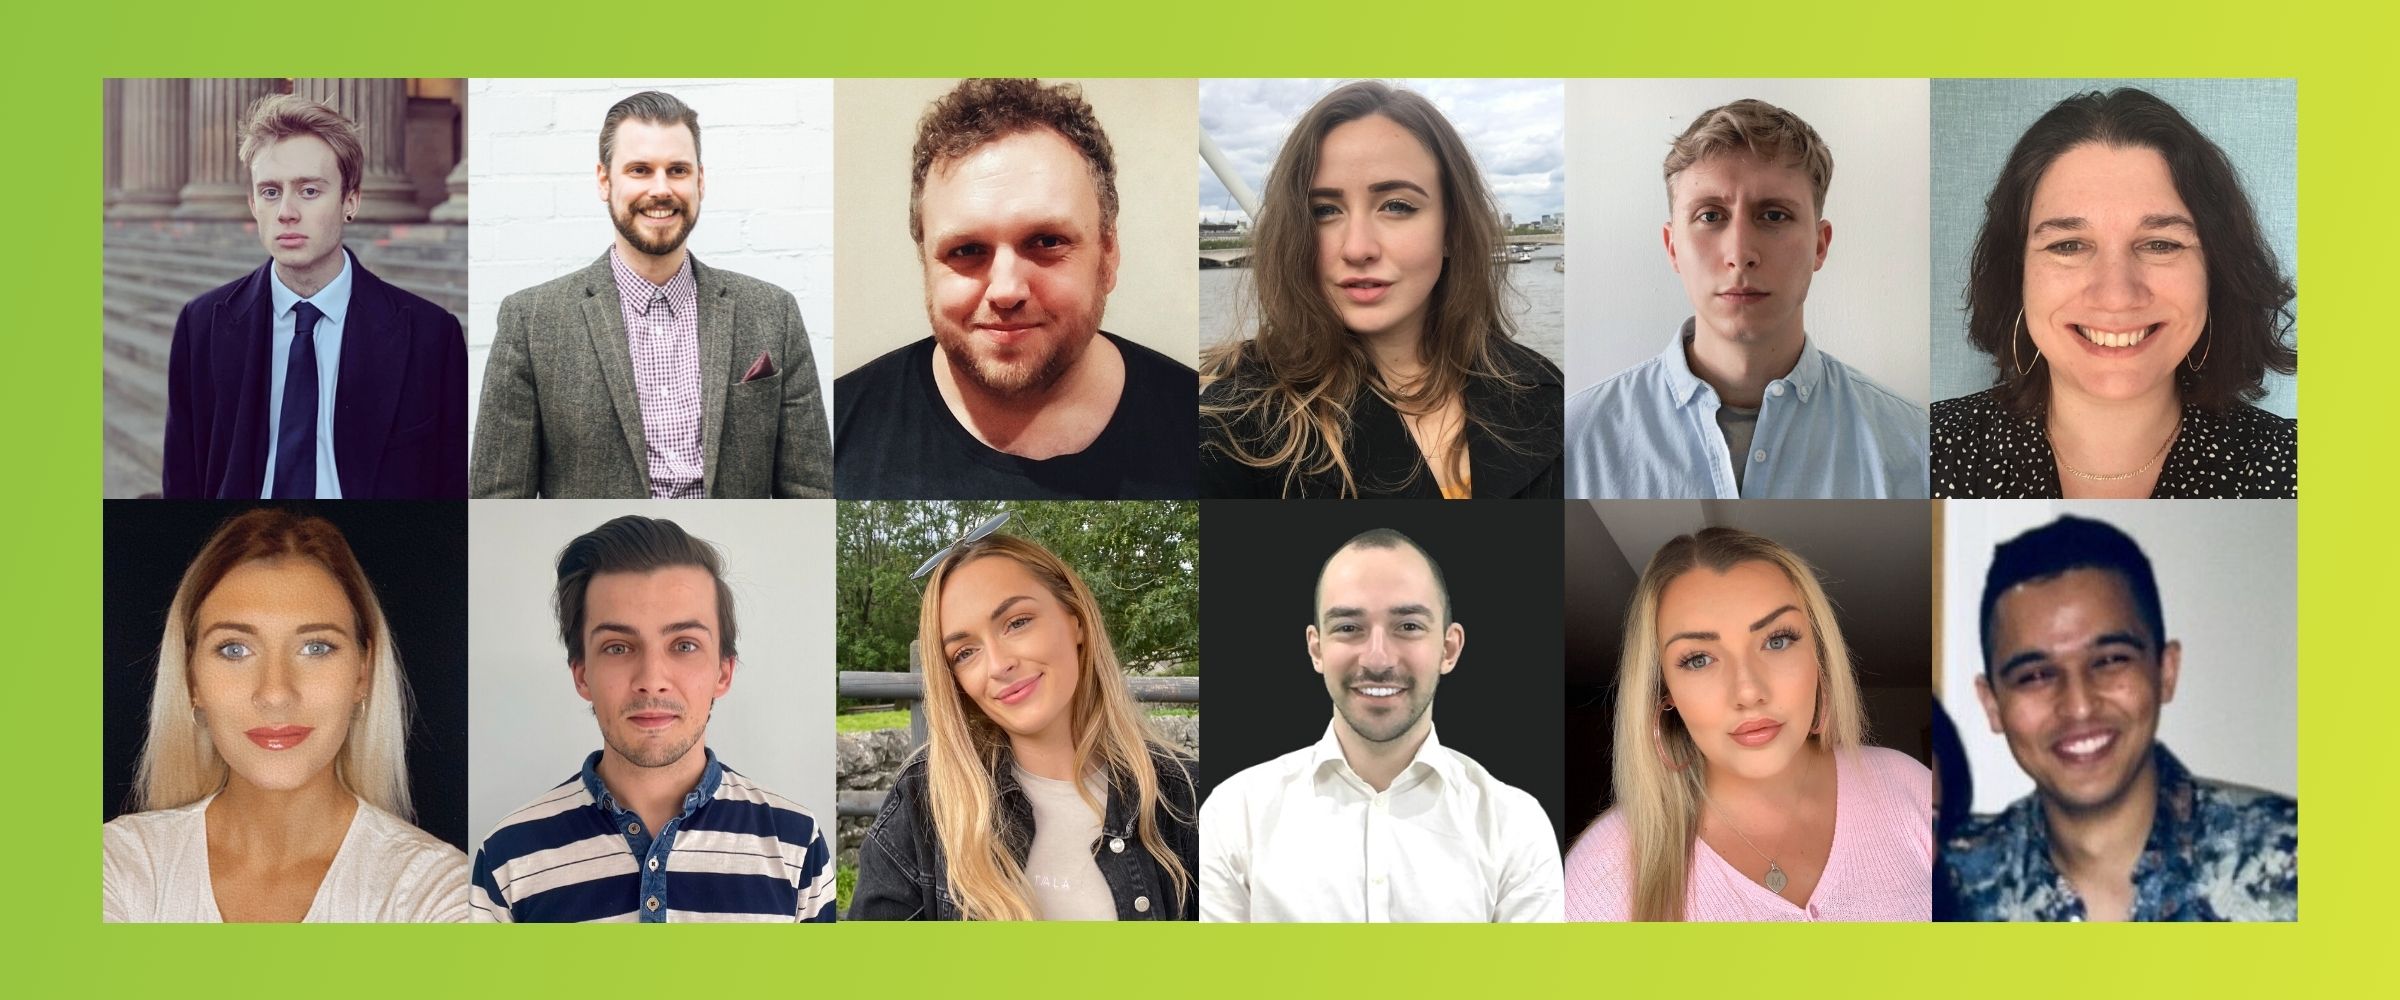 The SEO Works Signals Digital Growth With 12 New Hires